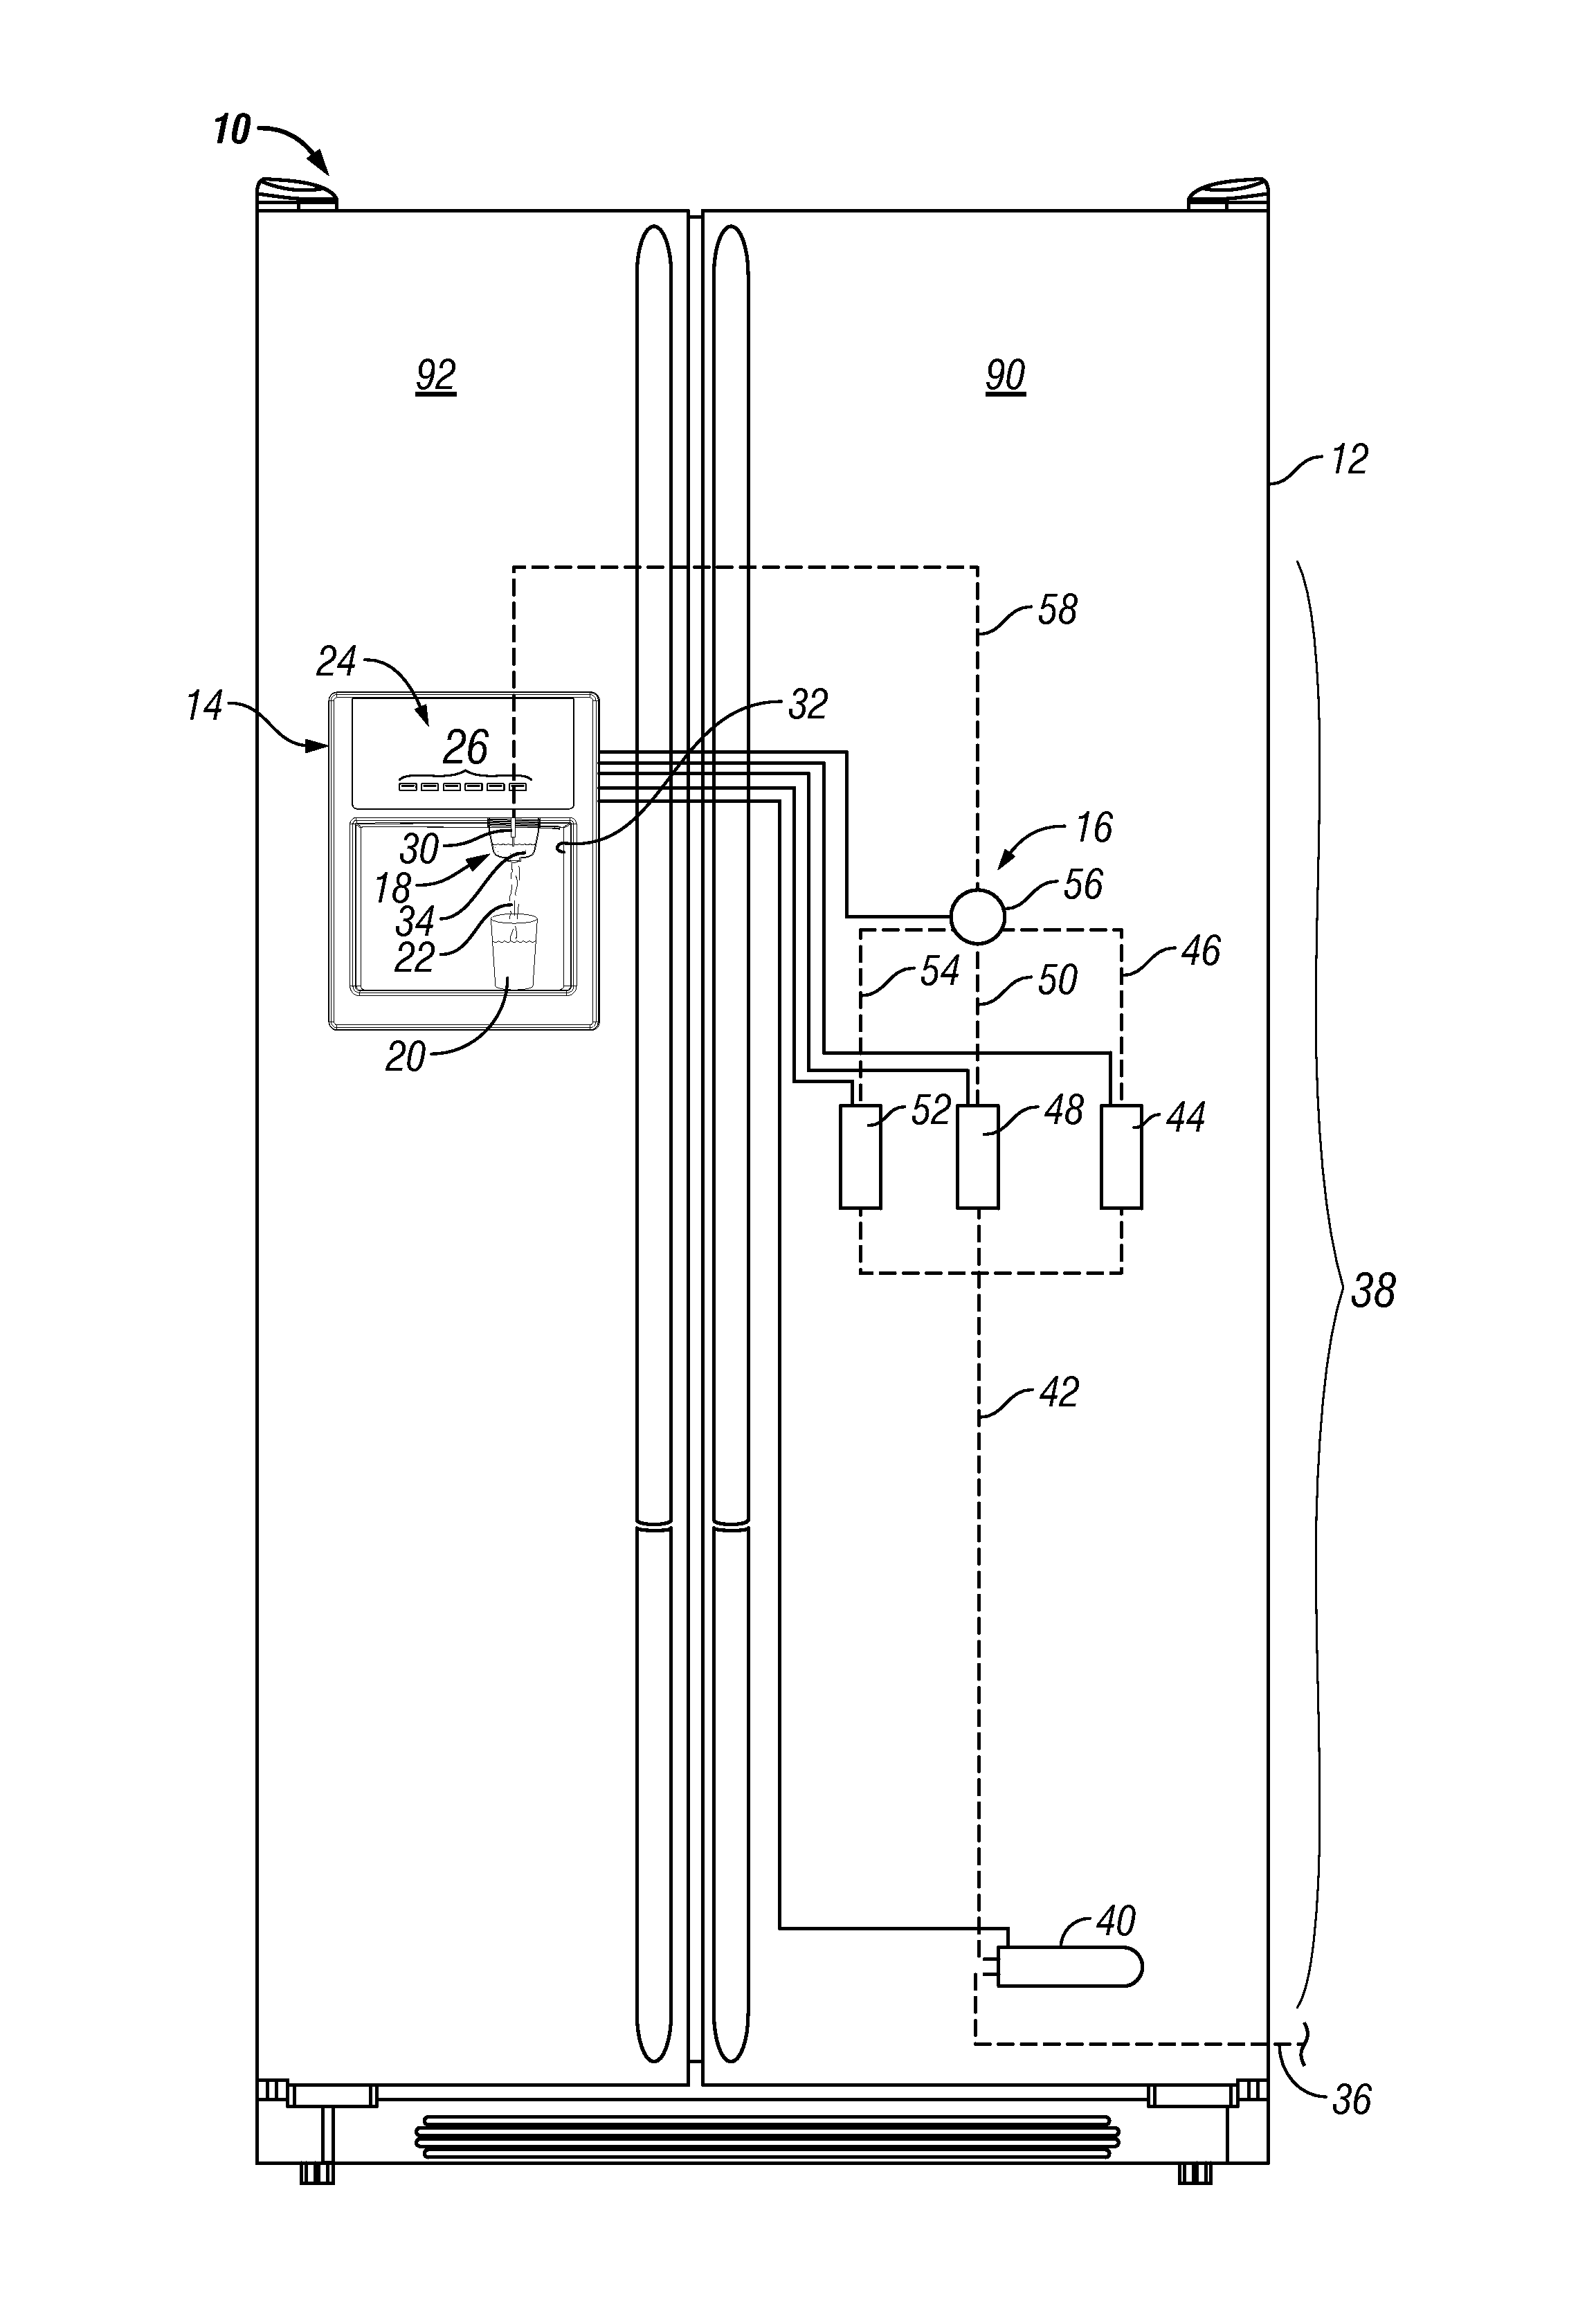 Apparatuses and methods for a refrigerator having liquid conditioning and enhancement components for enhanced beverage dispensing